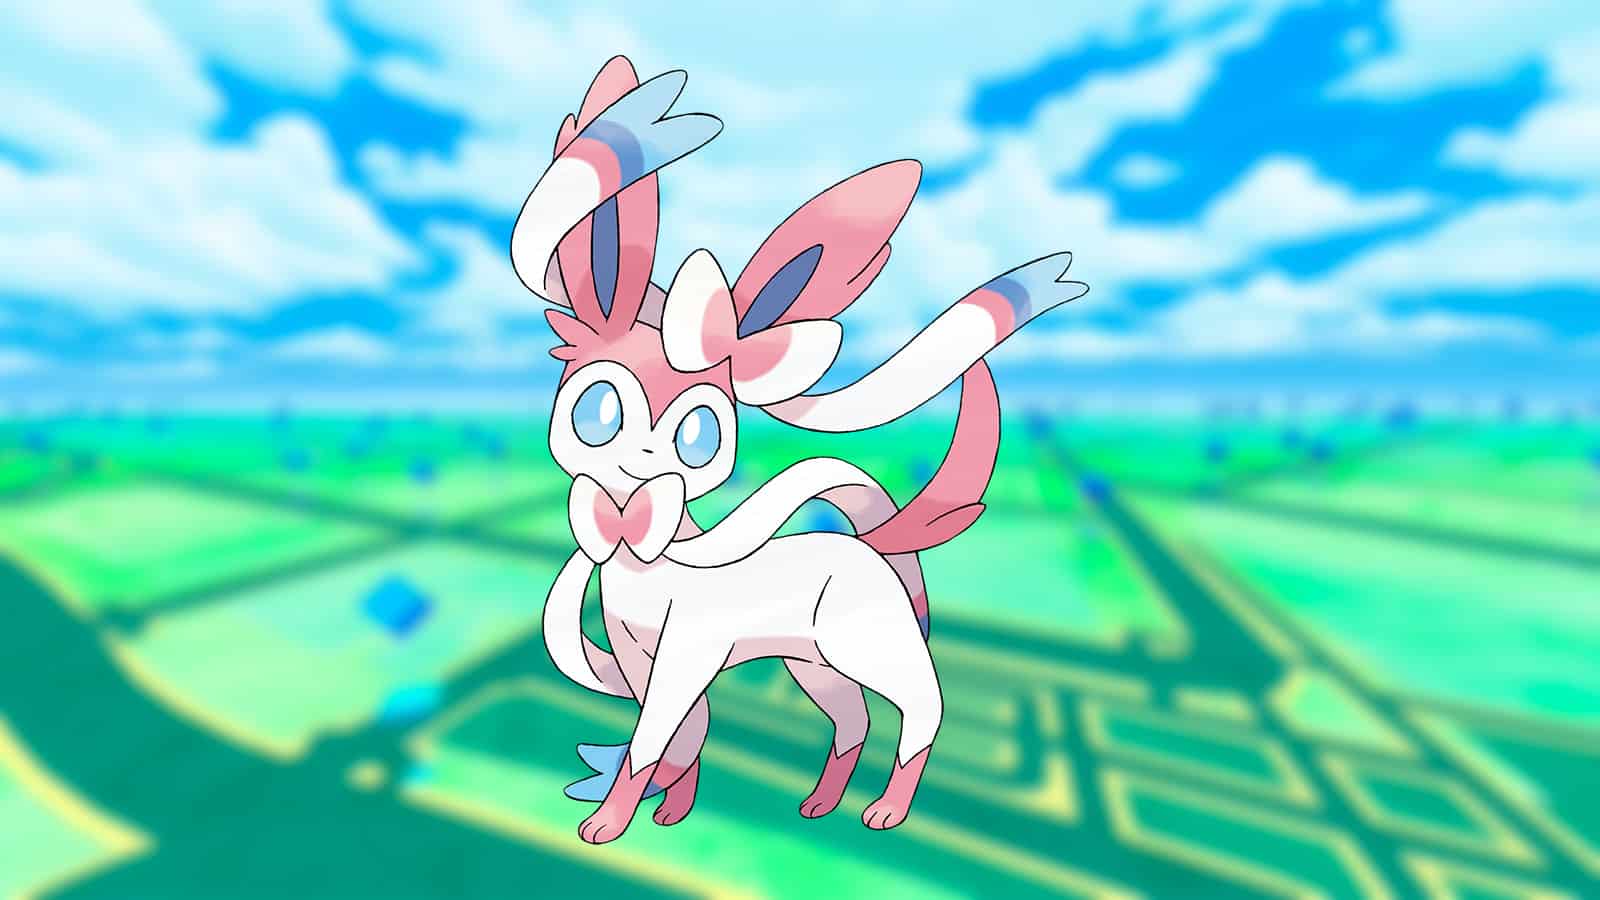 Pokemon GO Eevee (December 2022): All evolution names, how to get, and more